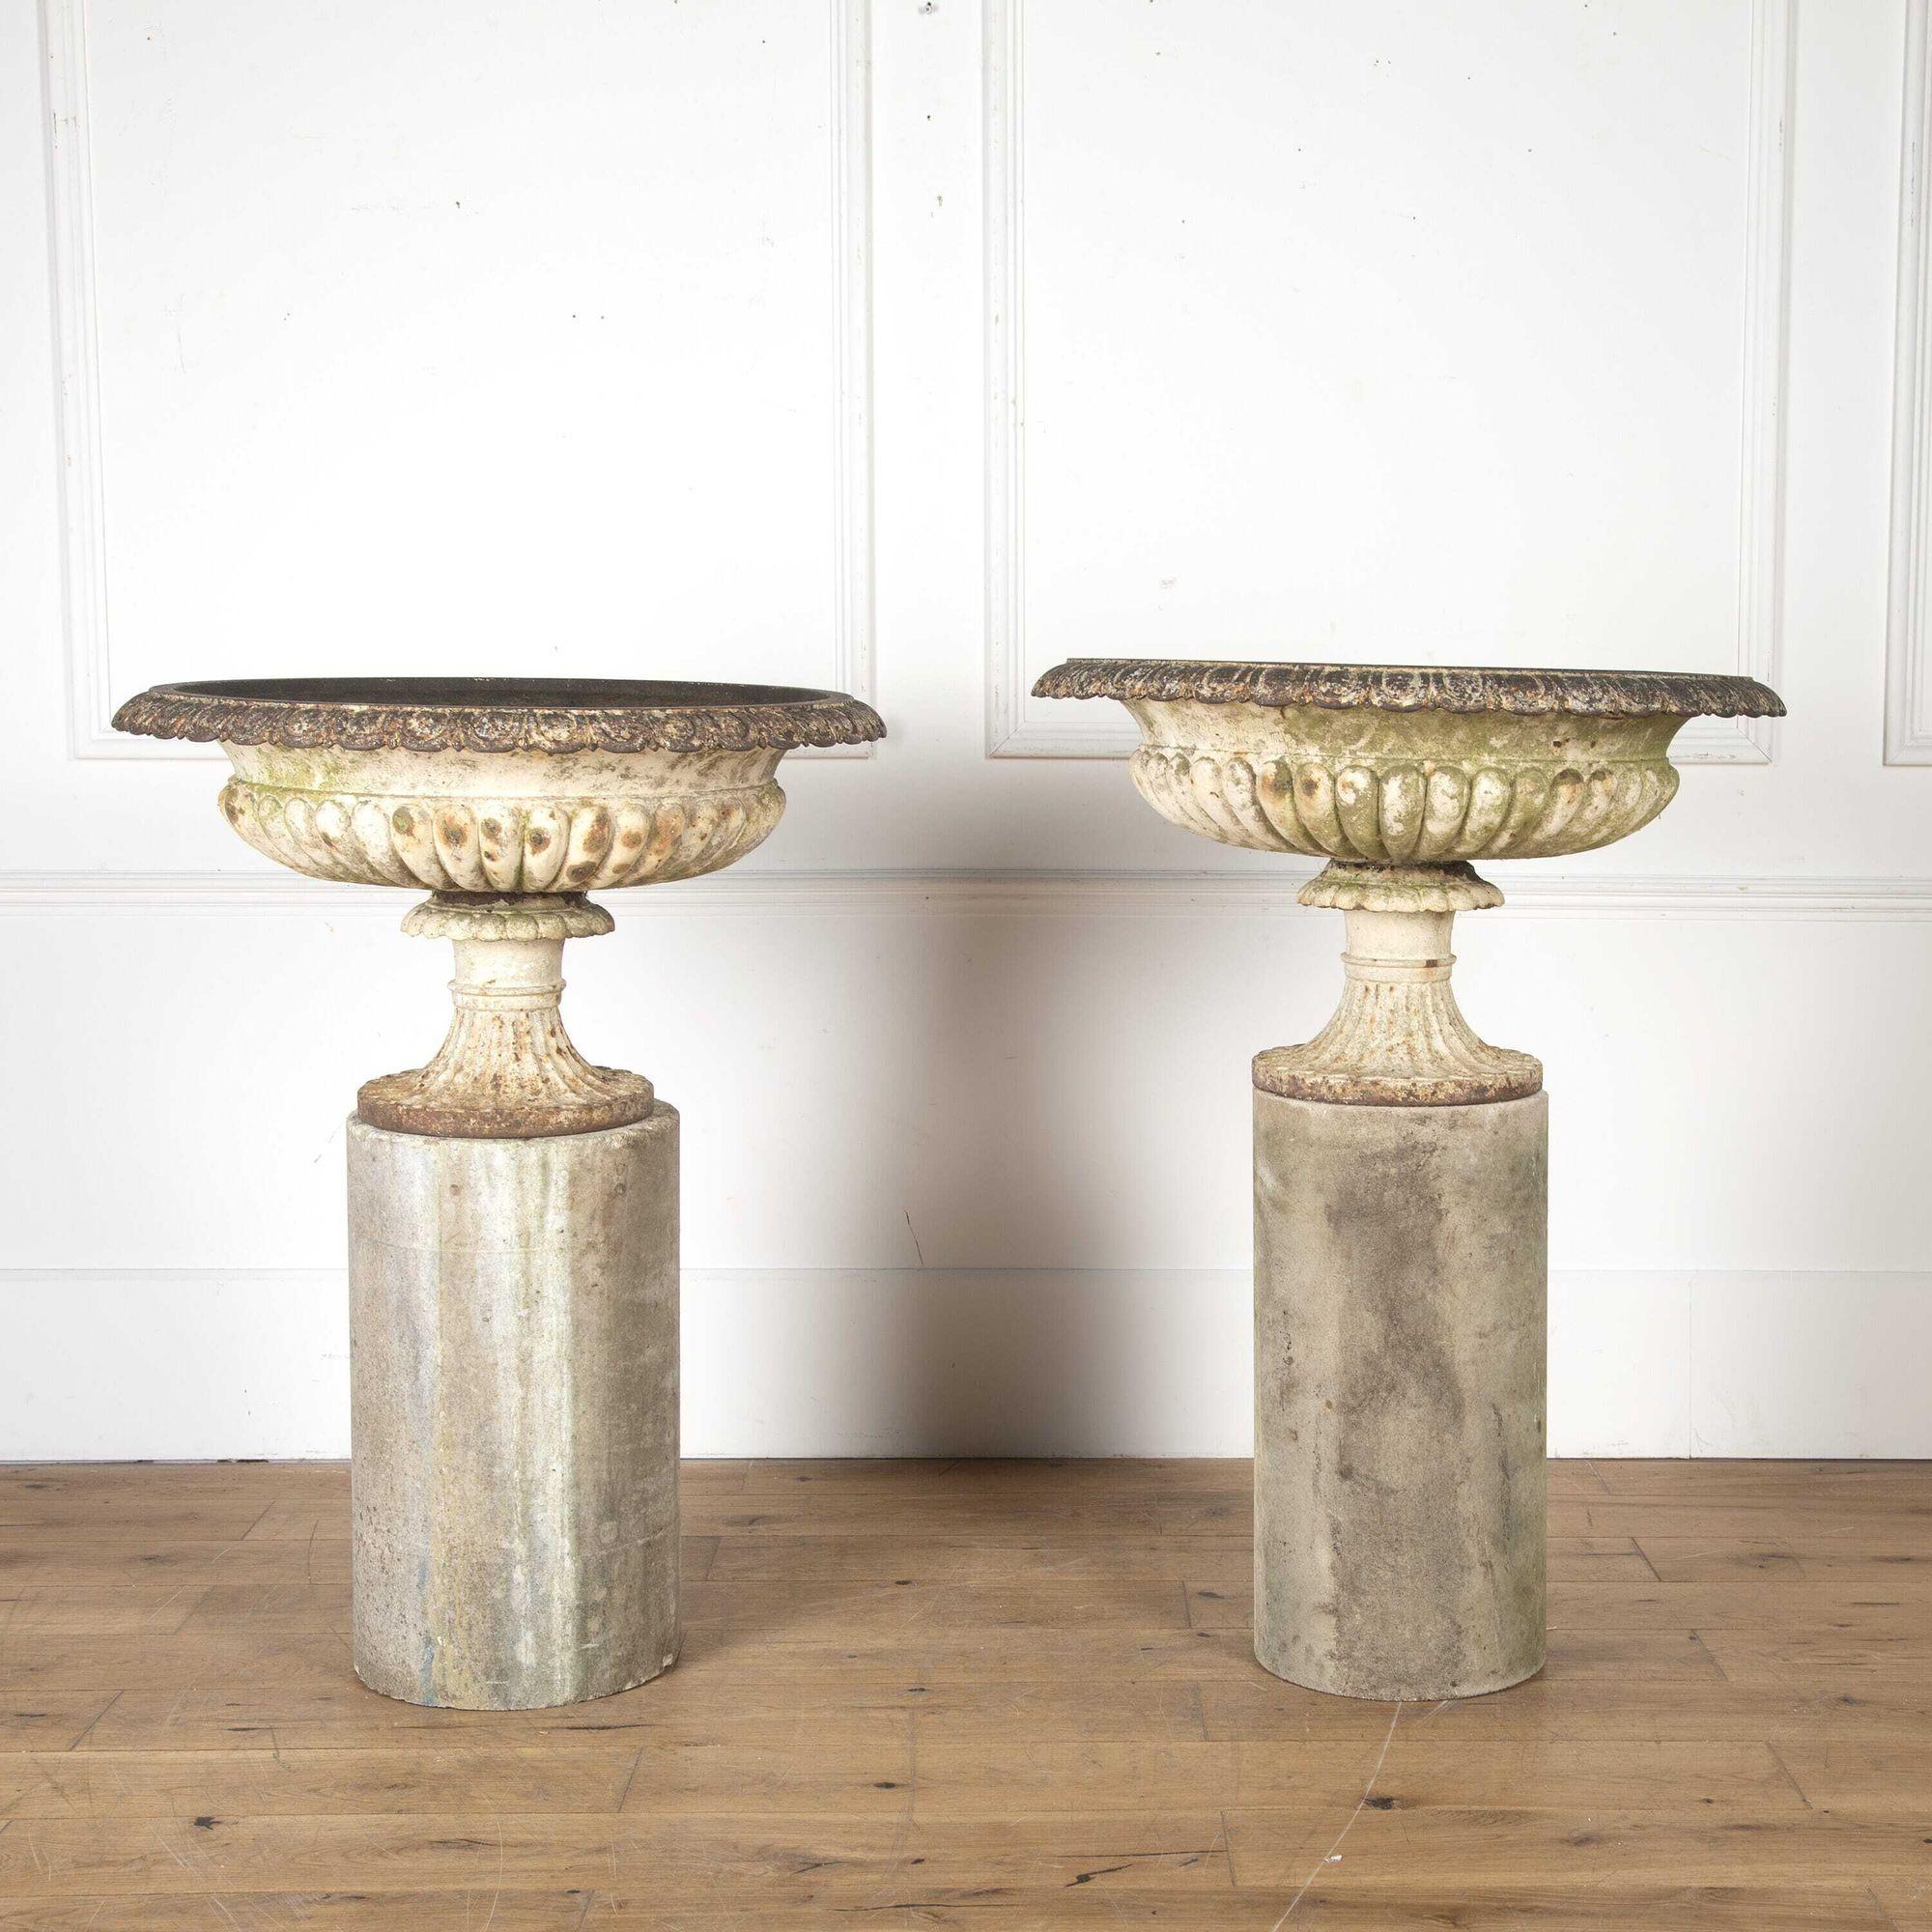 Attractive pair of 19th century cast iron urns on sandstone columns. 
The urns themselves have egg and dart decorations throughout, whilst the plinth bases feature very little decoration but have a great shape. 
These urns have weathered and aged